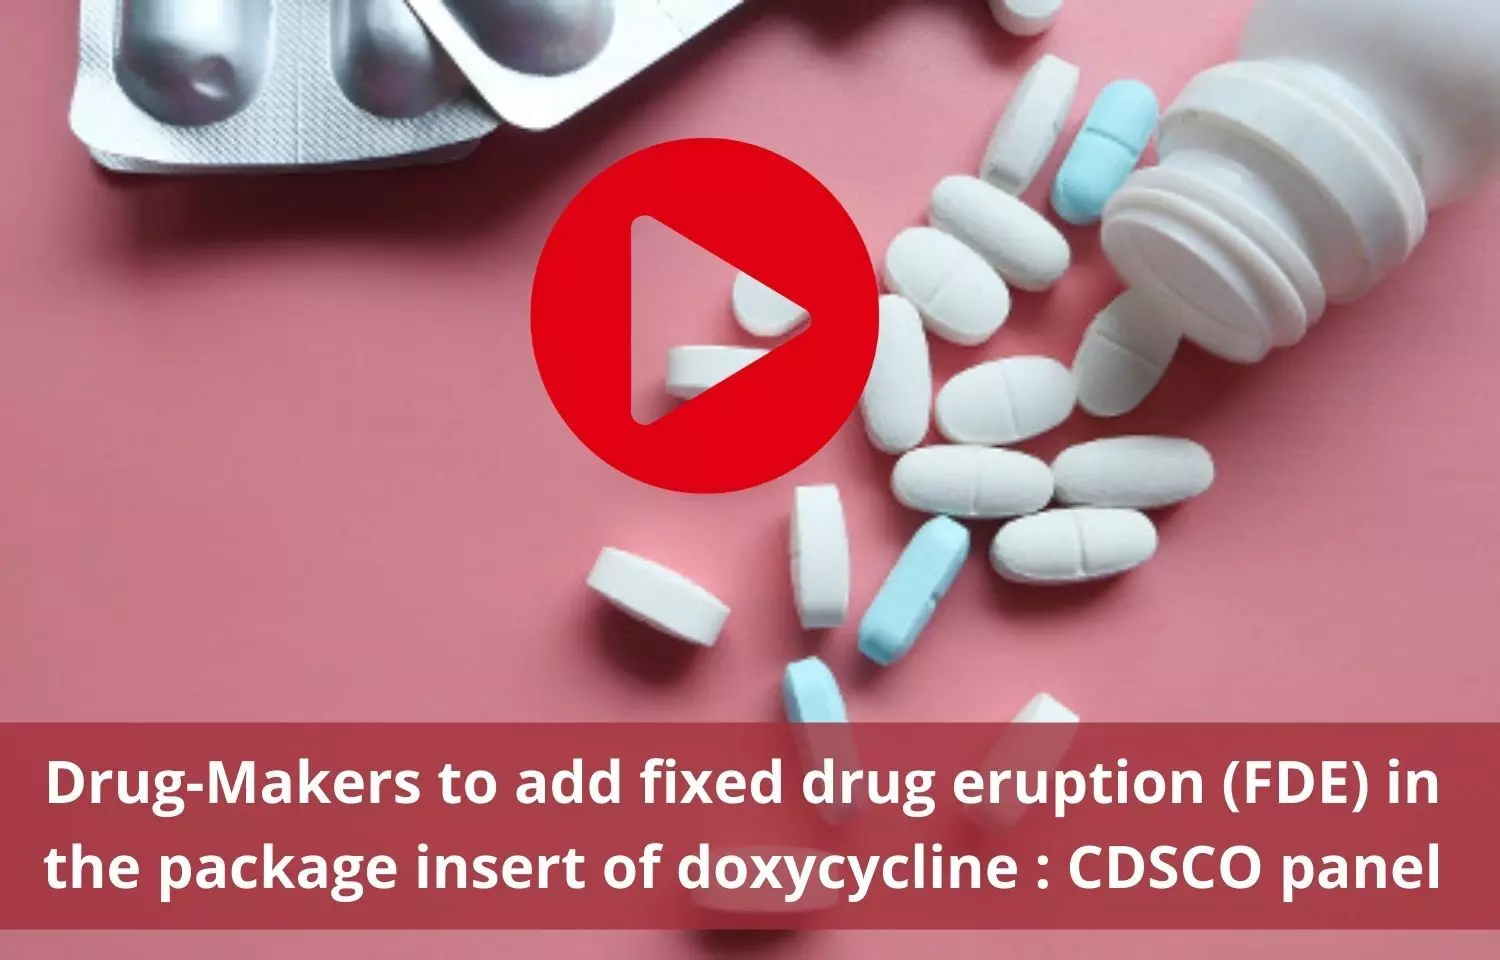 Fixed Drug Eruption in the package insert of Doxycycline to be added